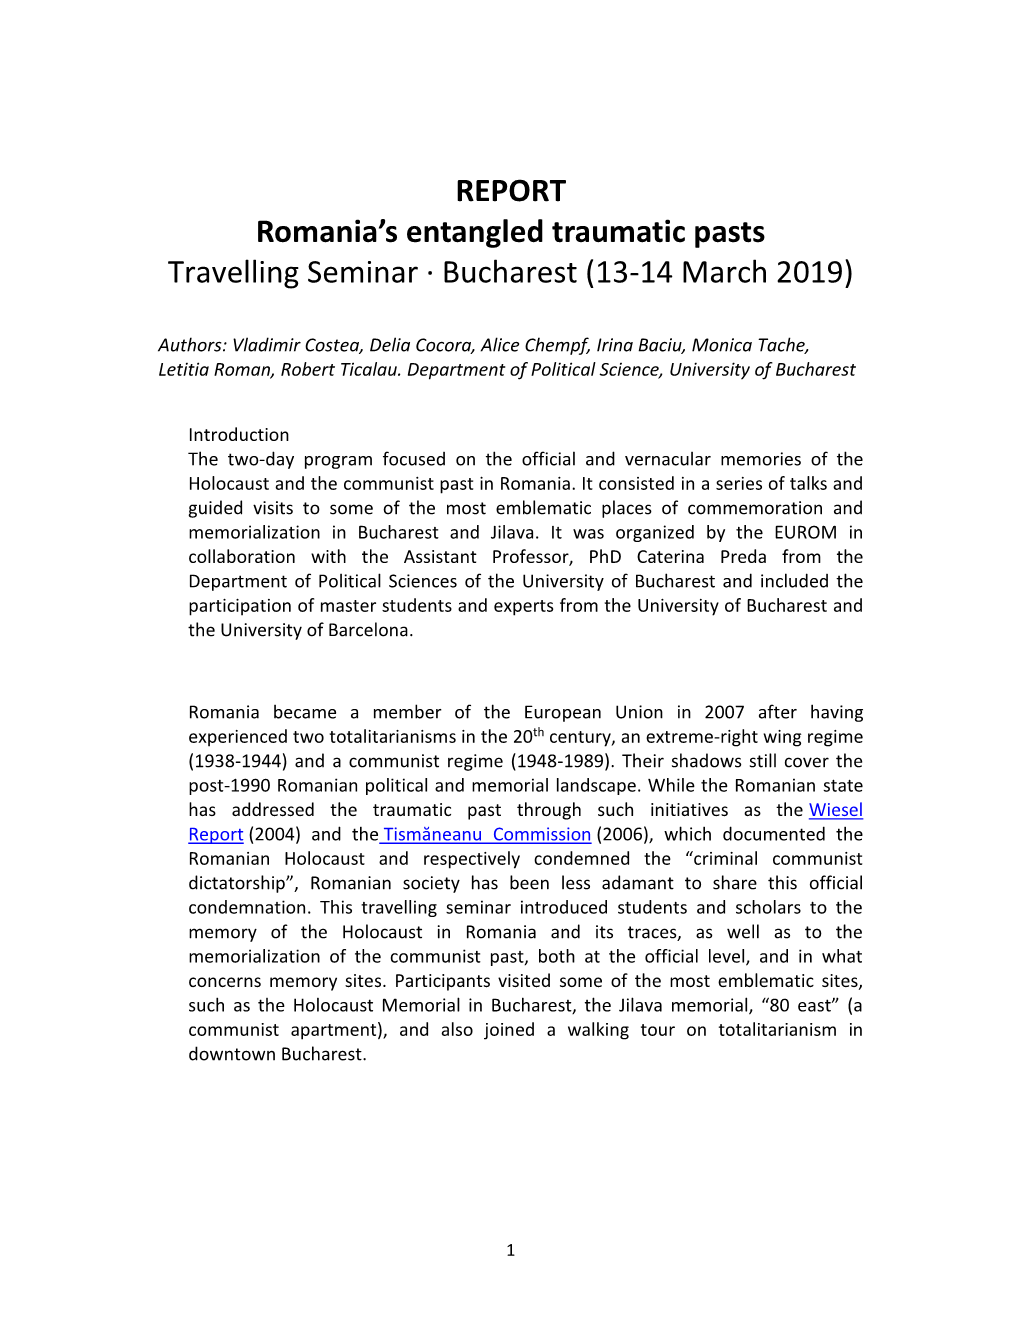 REPORT Romania's Entangled Traumatic Pasts Travelling Seminar